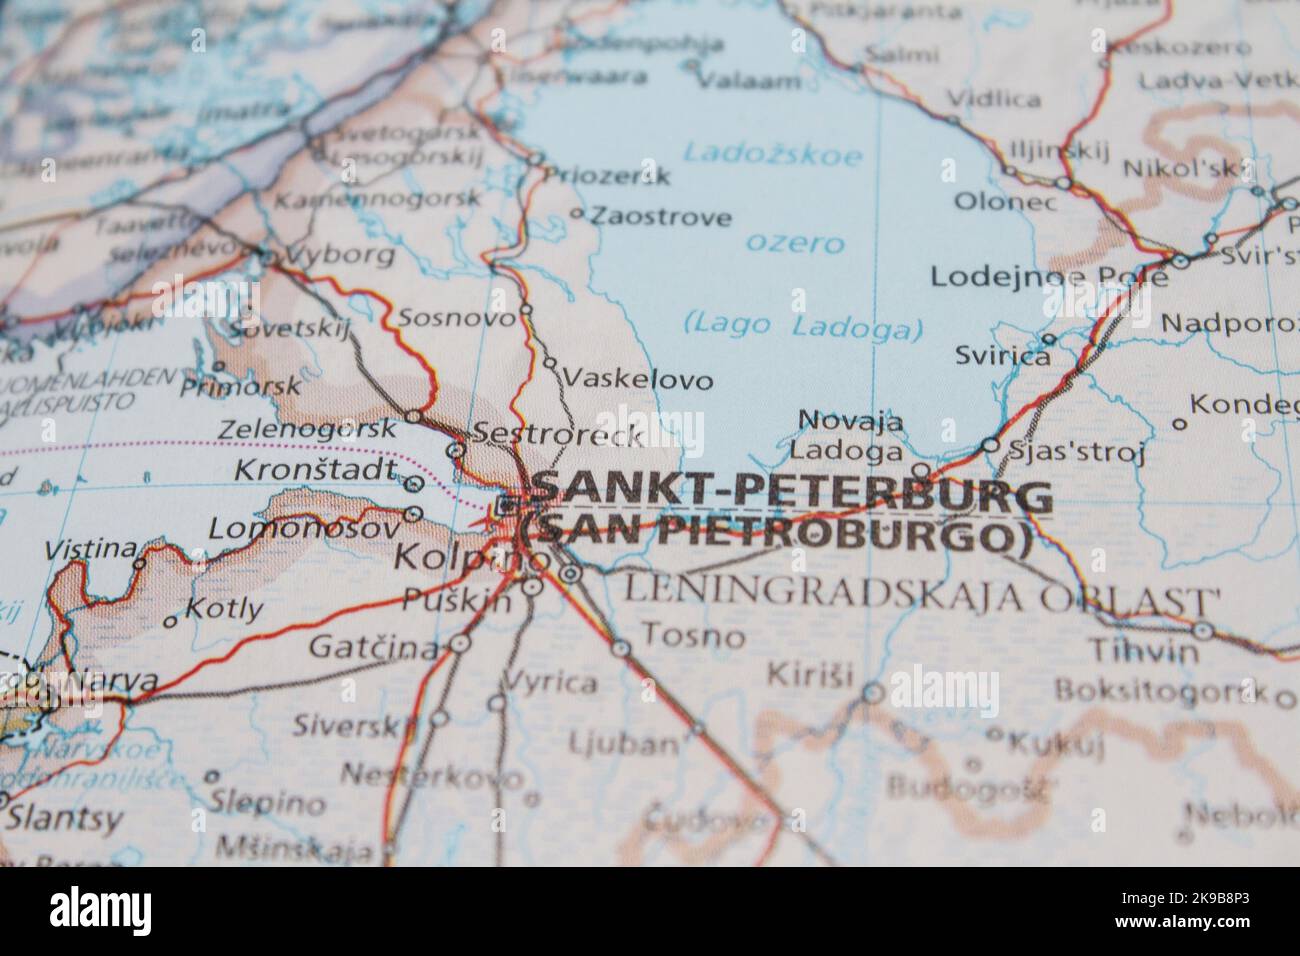 Map of St. Petersburg in Russia with the main roads and communications routes. Stock Photo